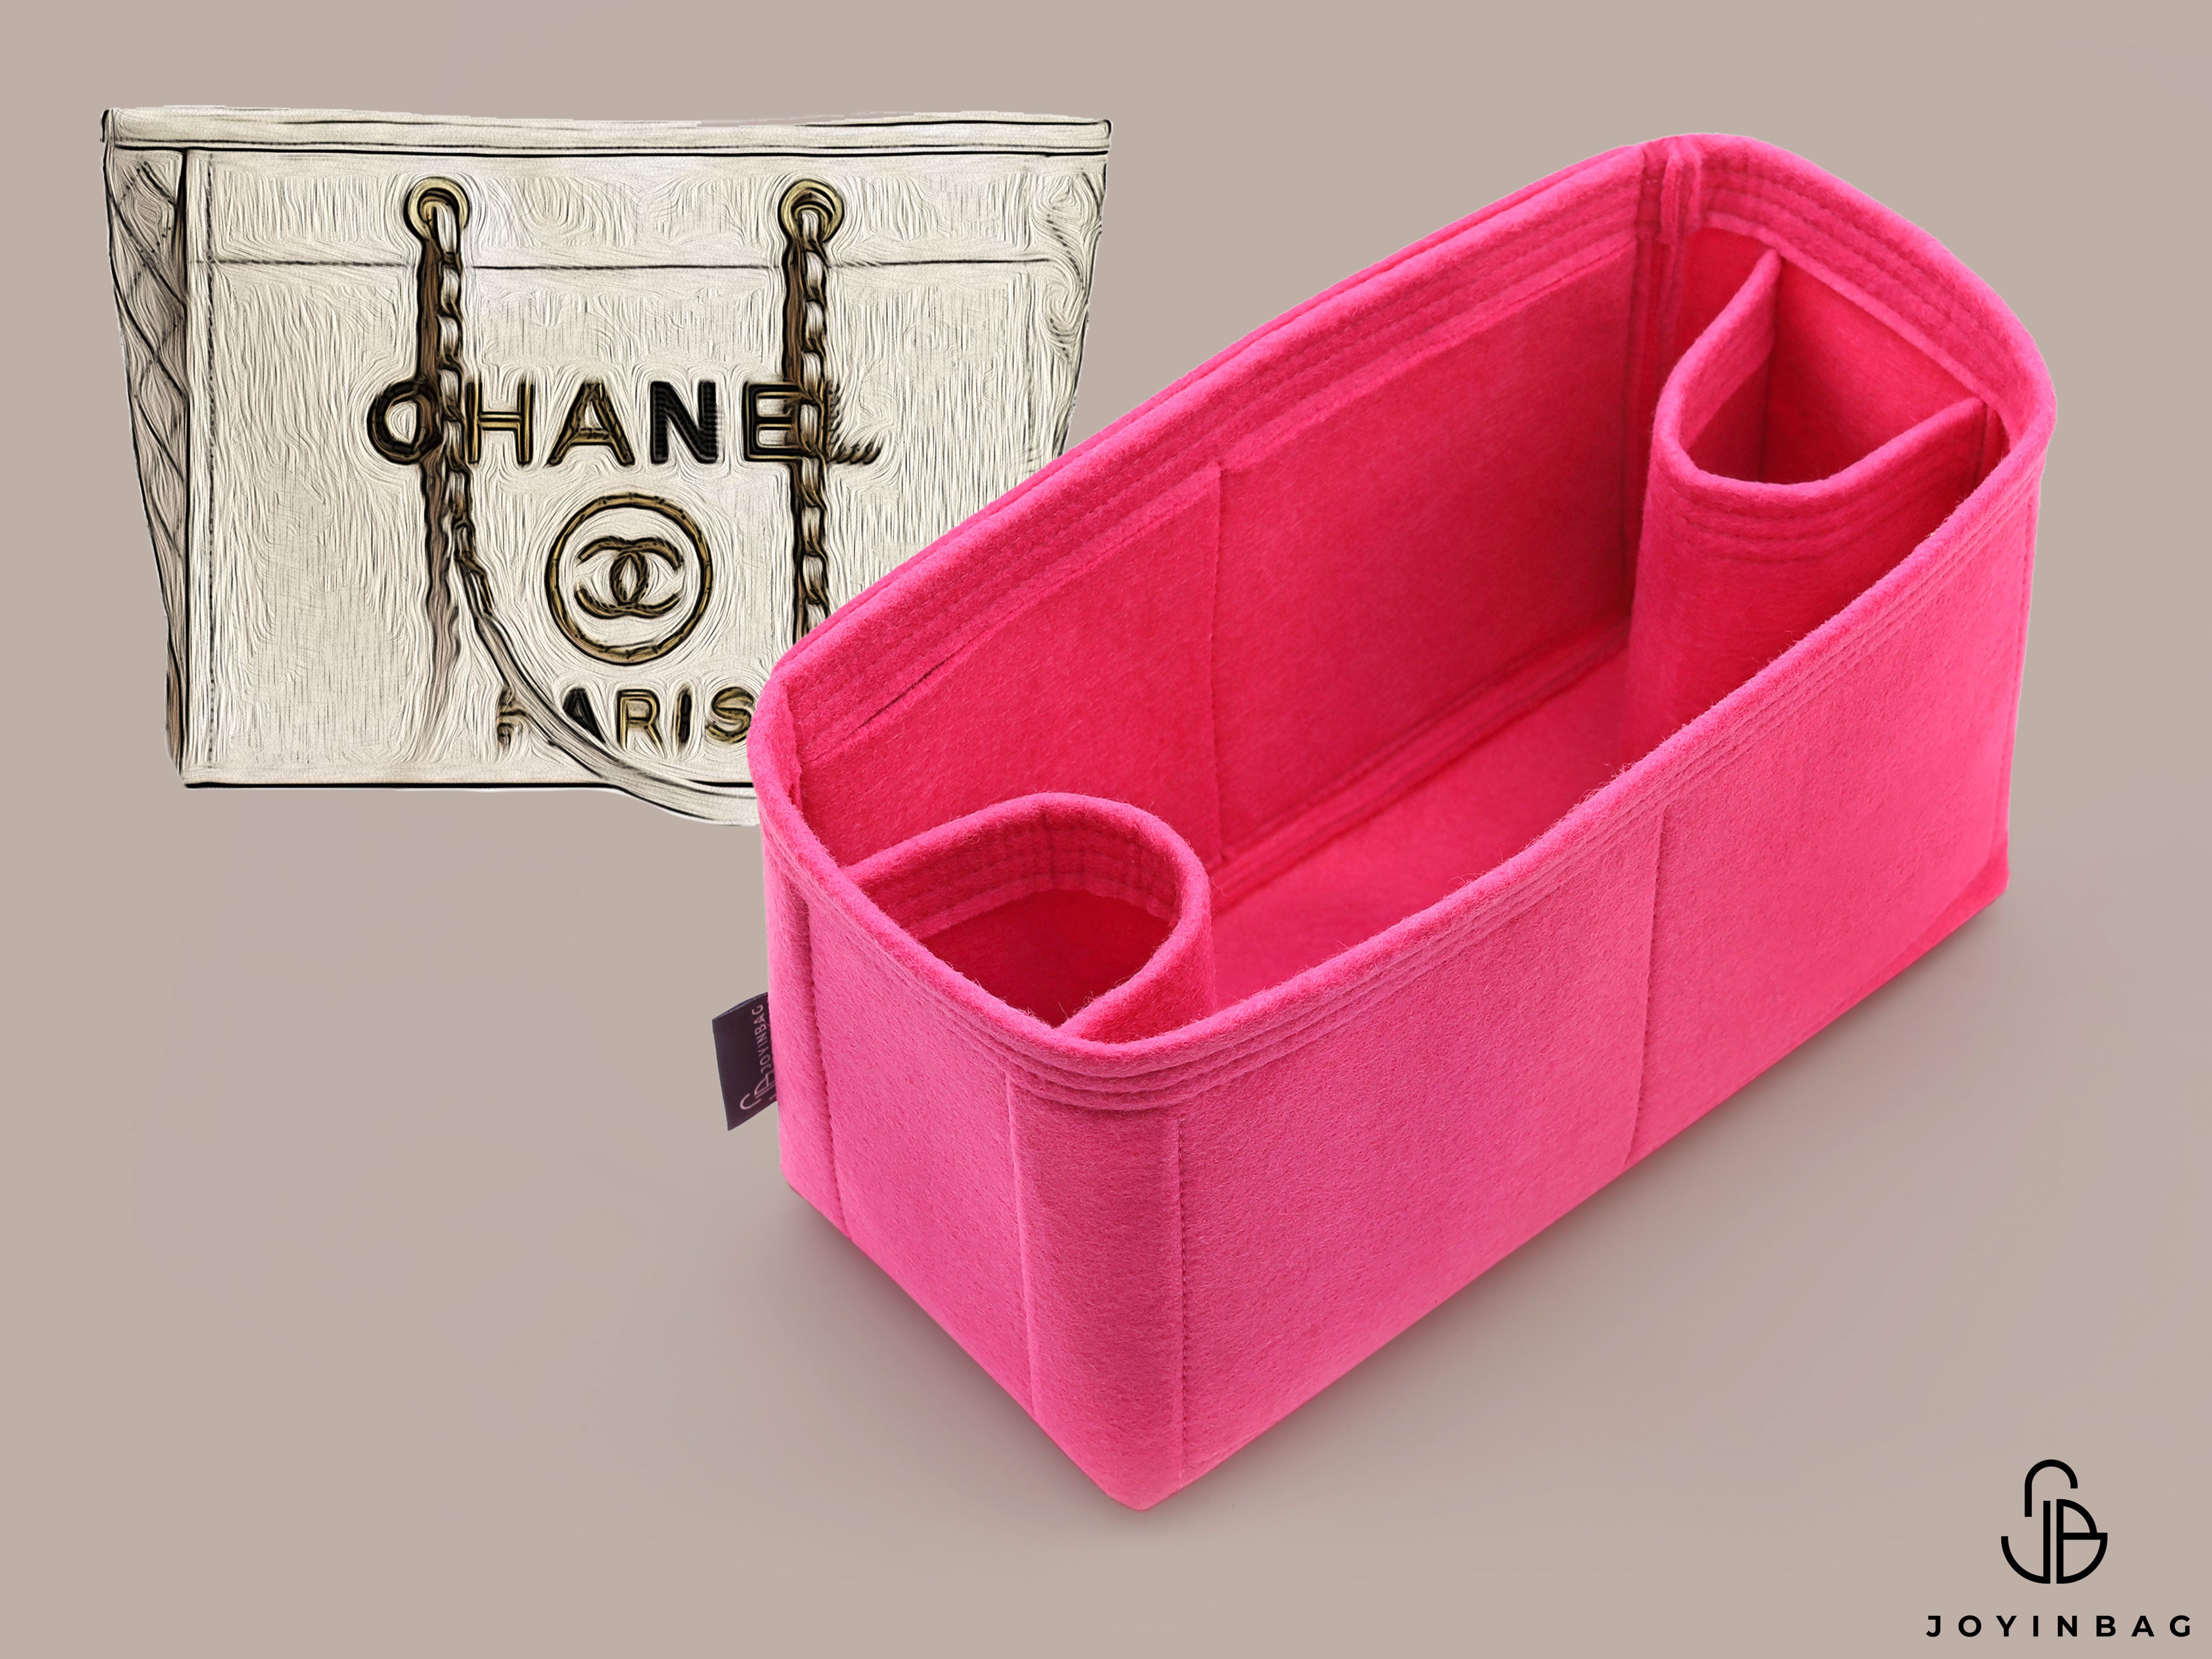  Bag Organizer liner For chanel coco handle small bag  organizer2020beige-S : Clothing, Shoes & Jewelry